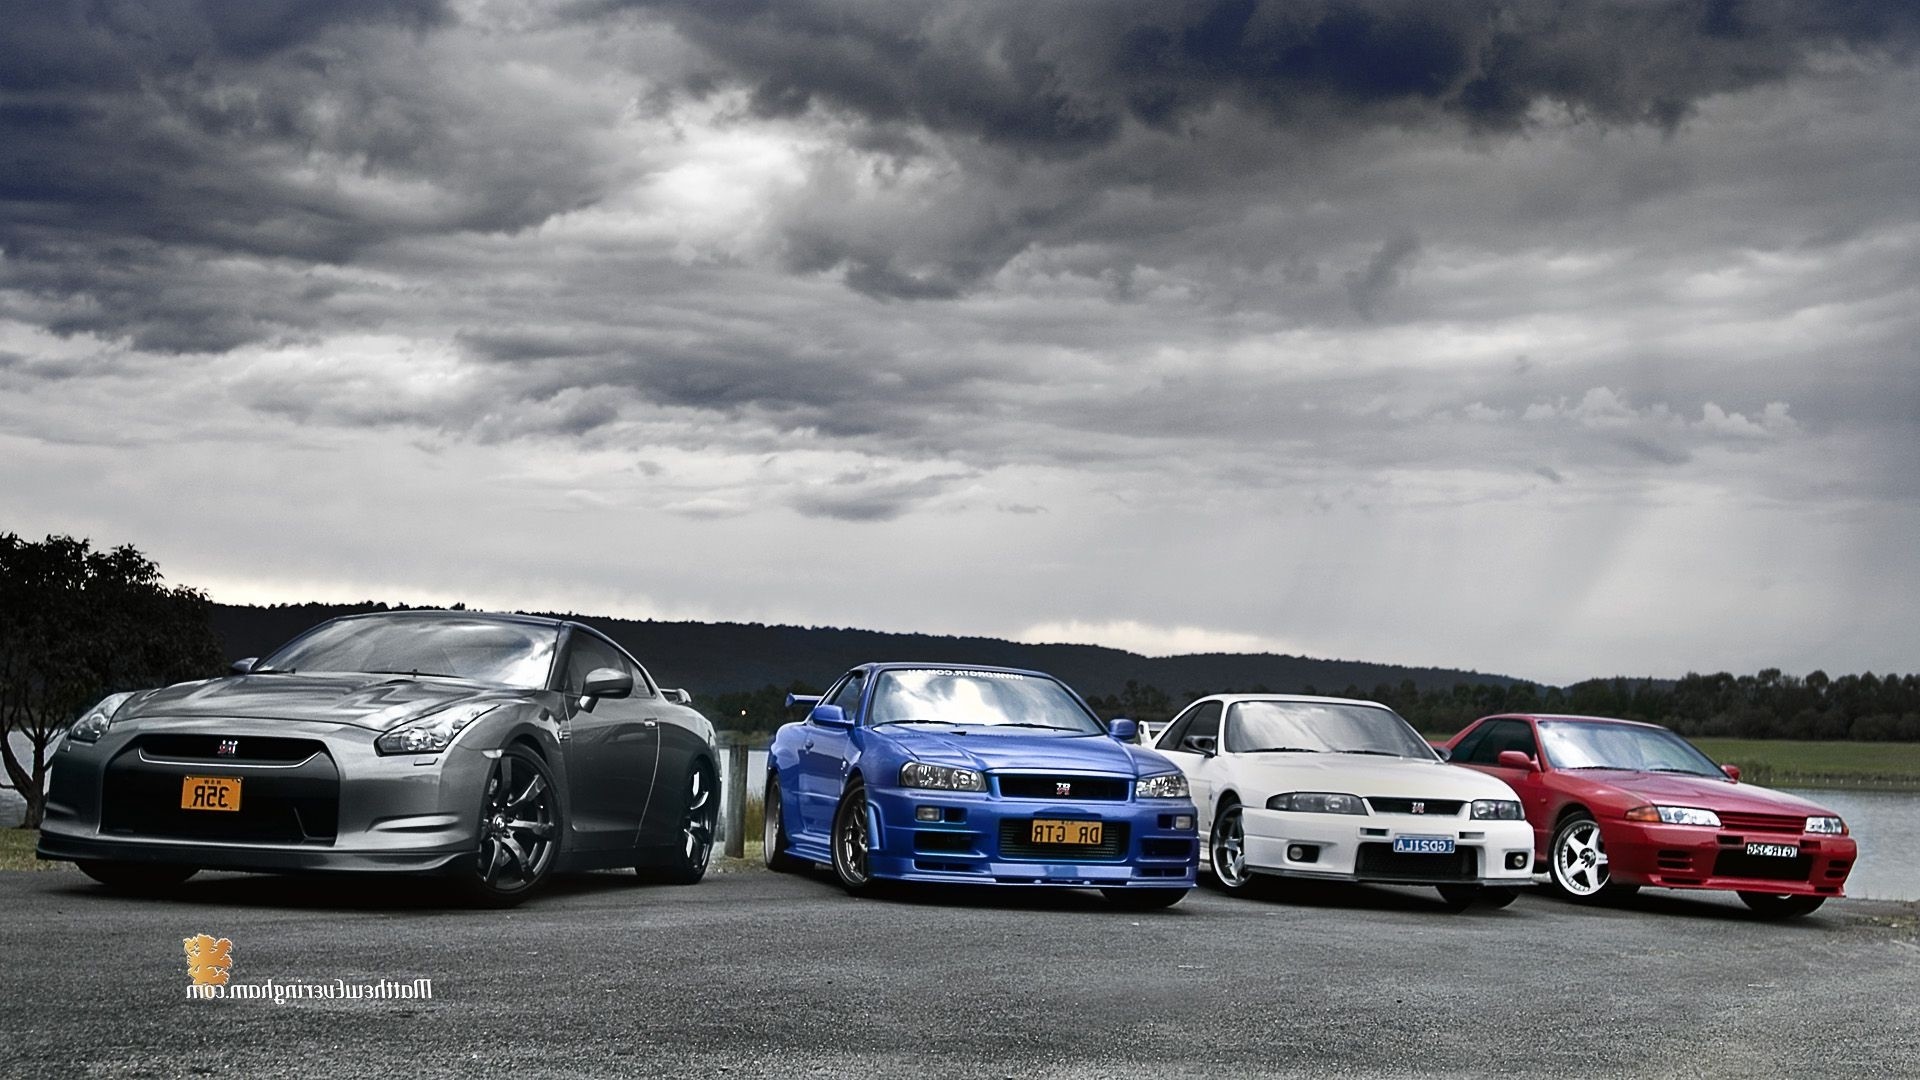 1920x1080 65 Nissan Skyline HD Wallpapers | Backgrounds - Wallpaper Abyss ...